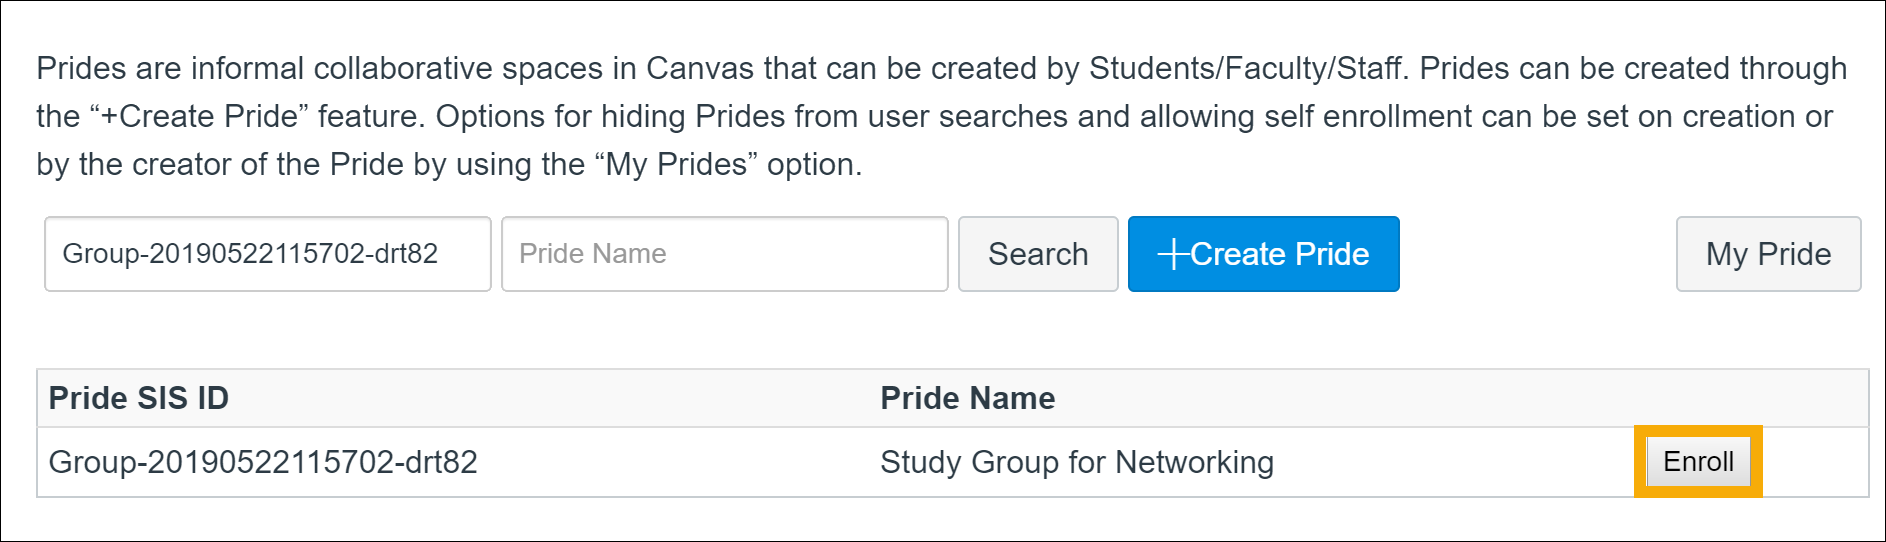 Click the Enroll button to join this Pride.